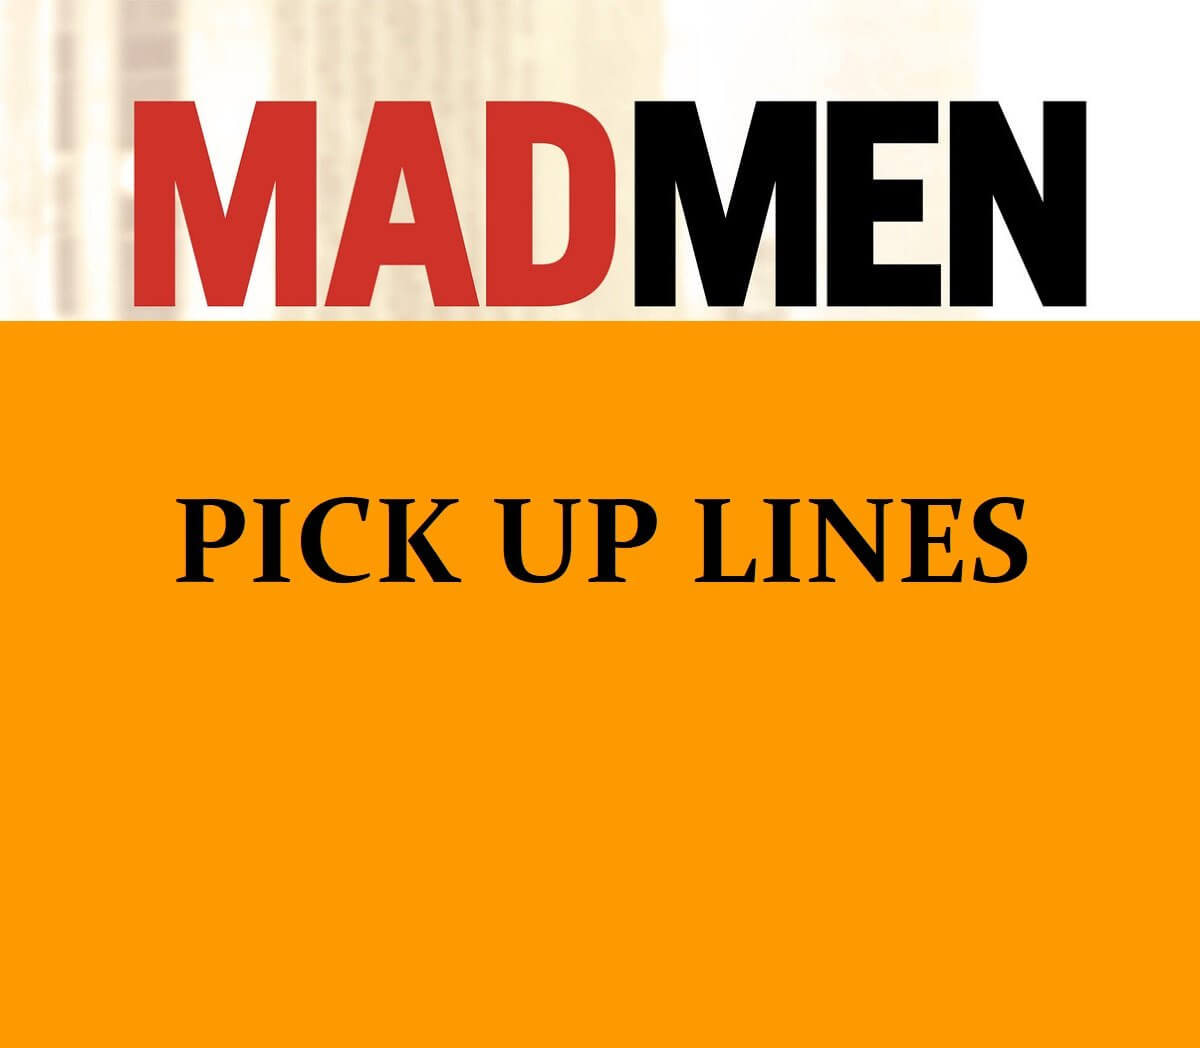 Pick Up Lines Inspired by Mad Men